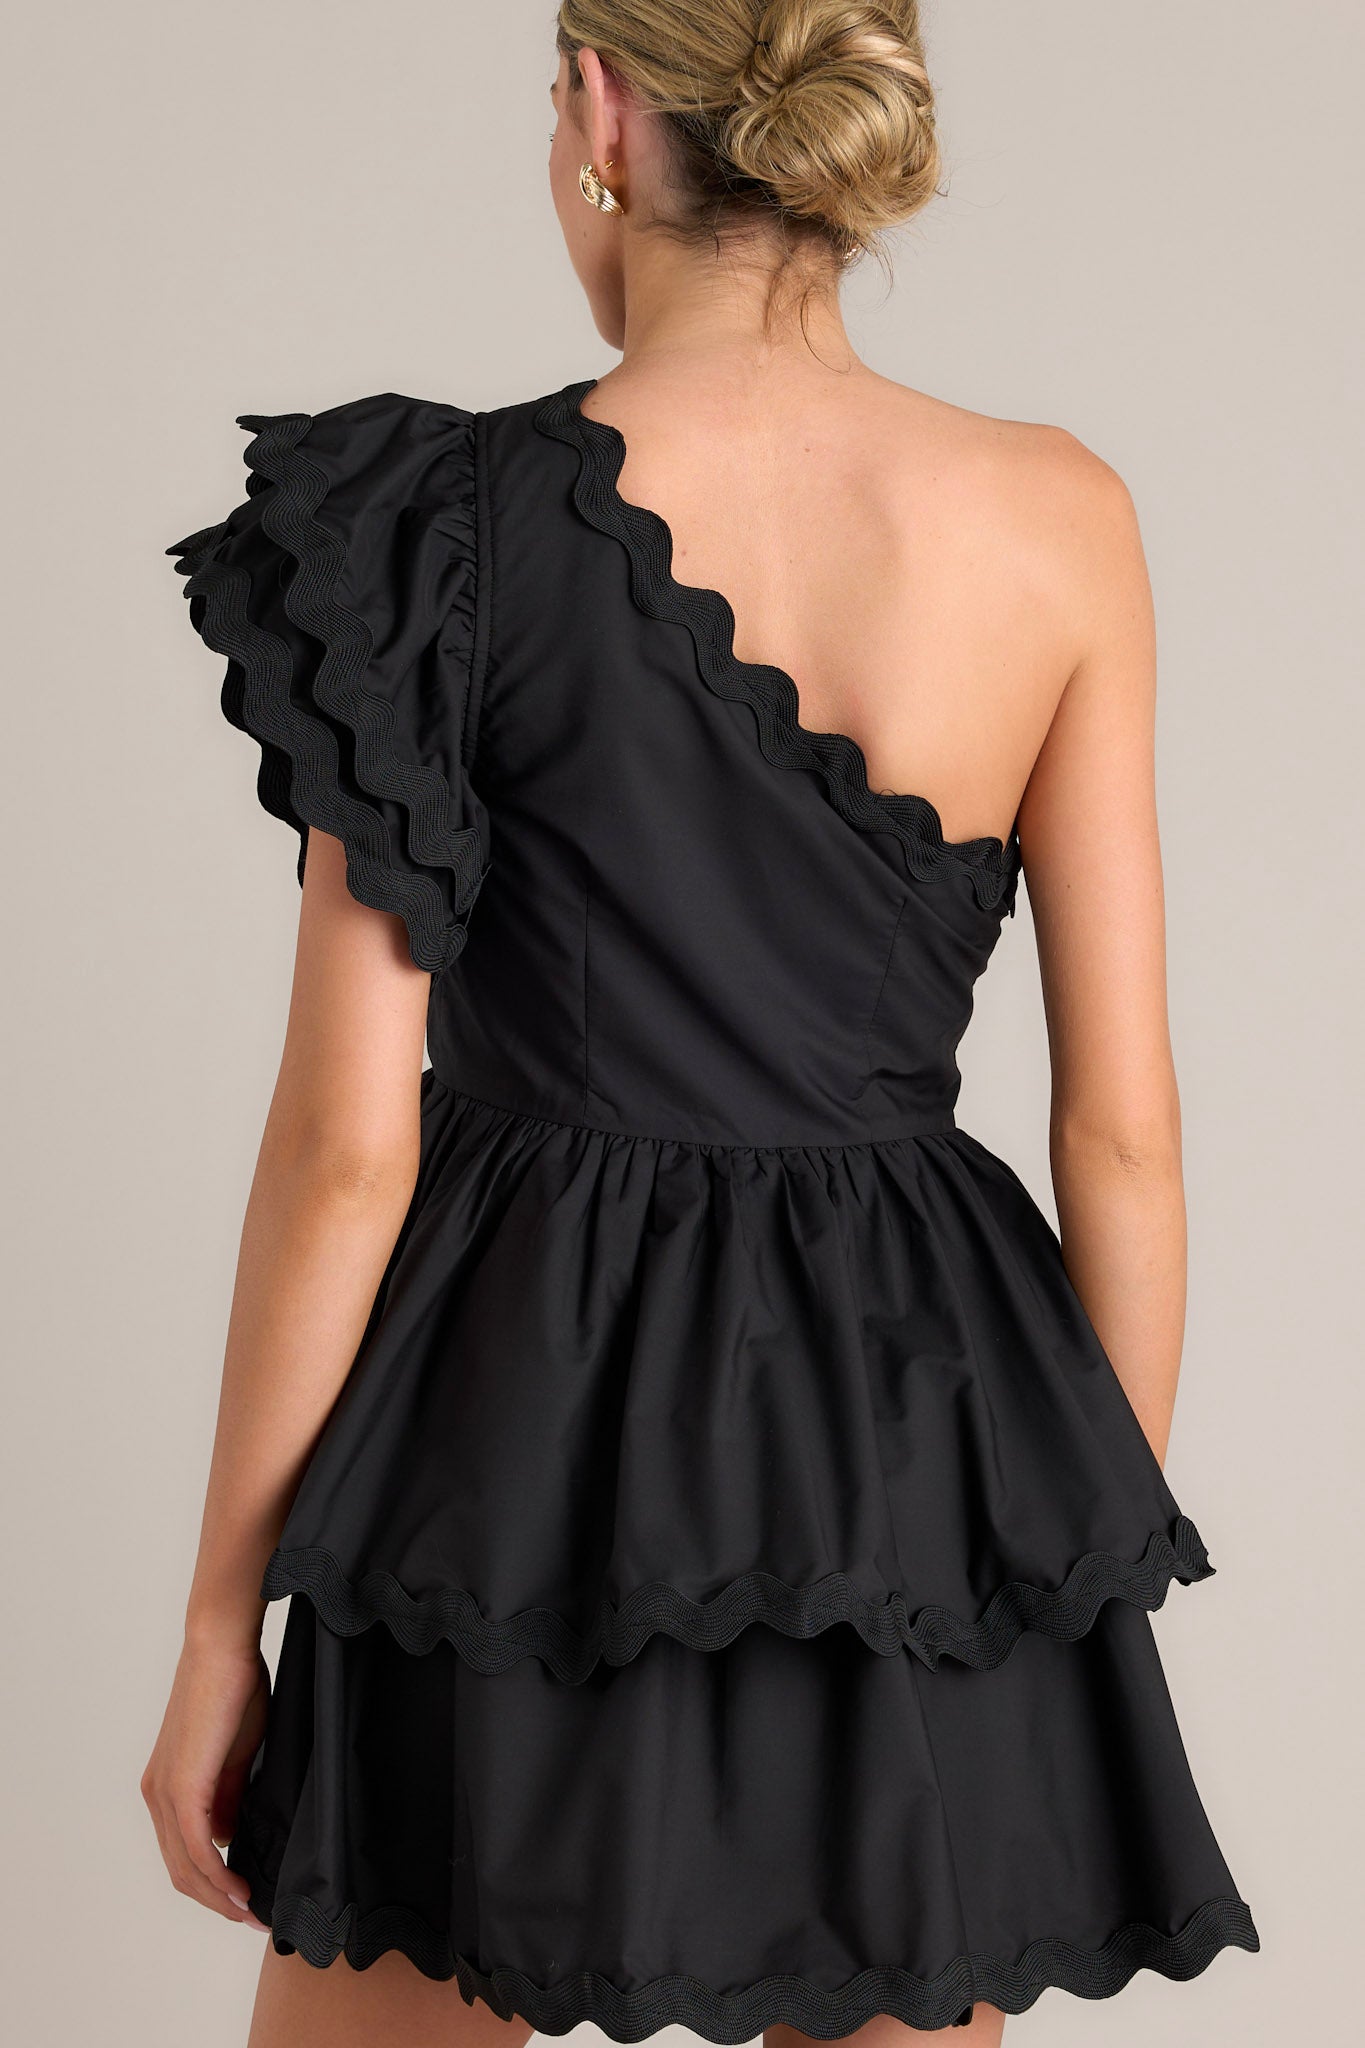 Back view of this black romper that features rick rack scalloped hems, a one shoulder neckline, a flutter sleeve, a side zipper closure, and a tiered skirt with built in shorts.